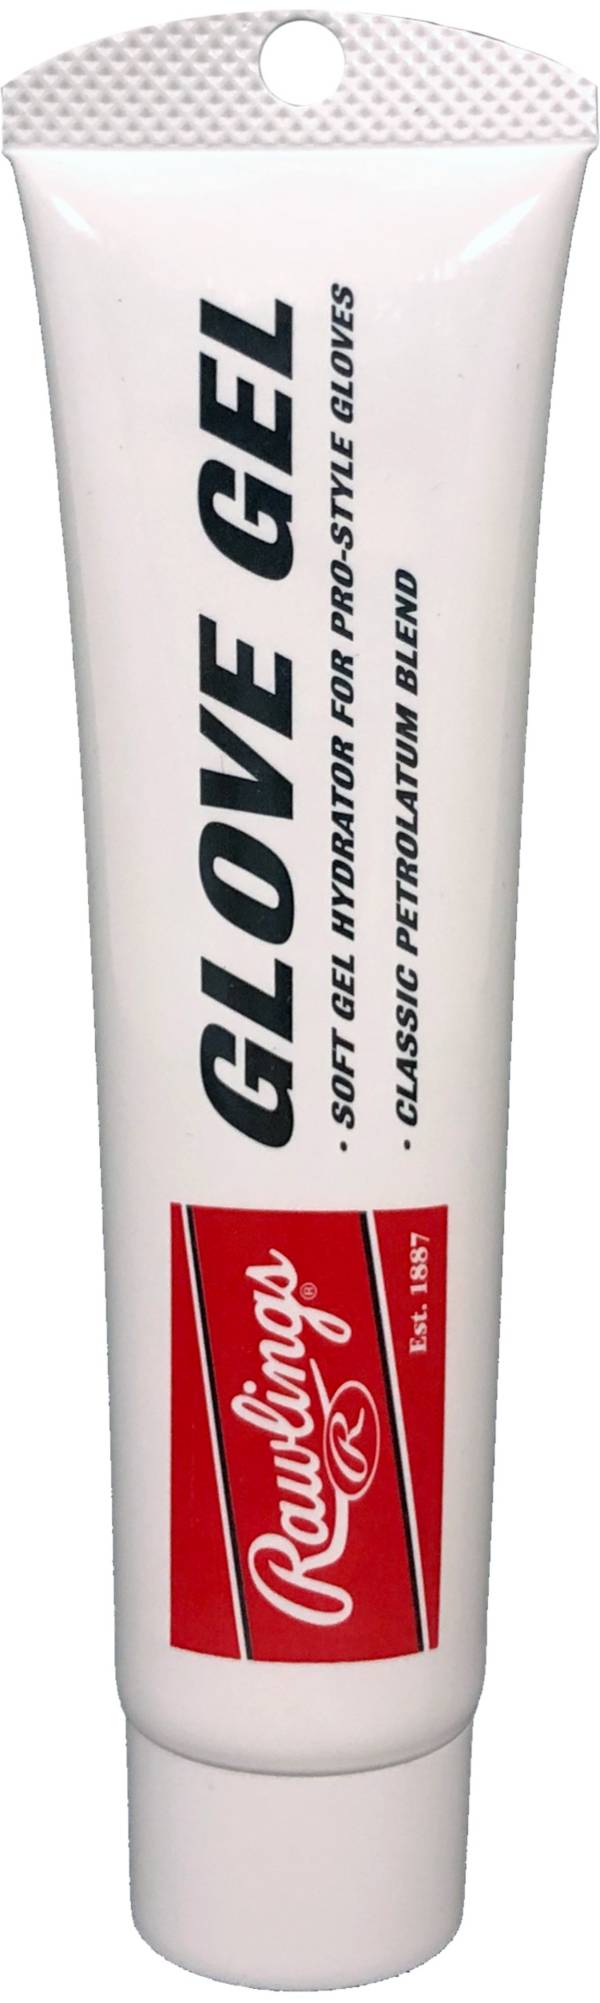 Rawlings Glove Gel Conditioner product image